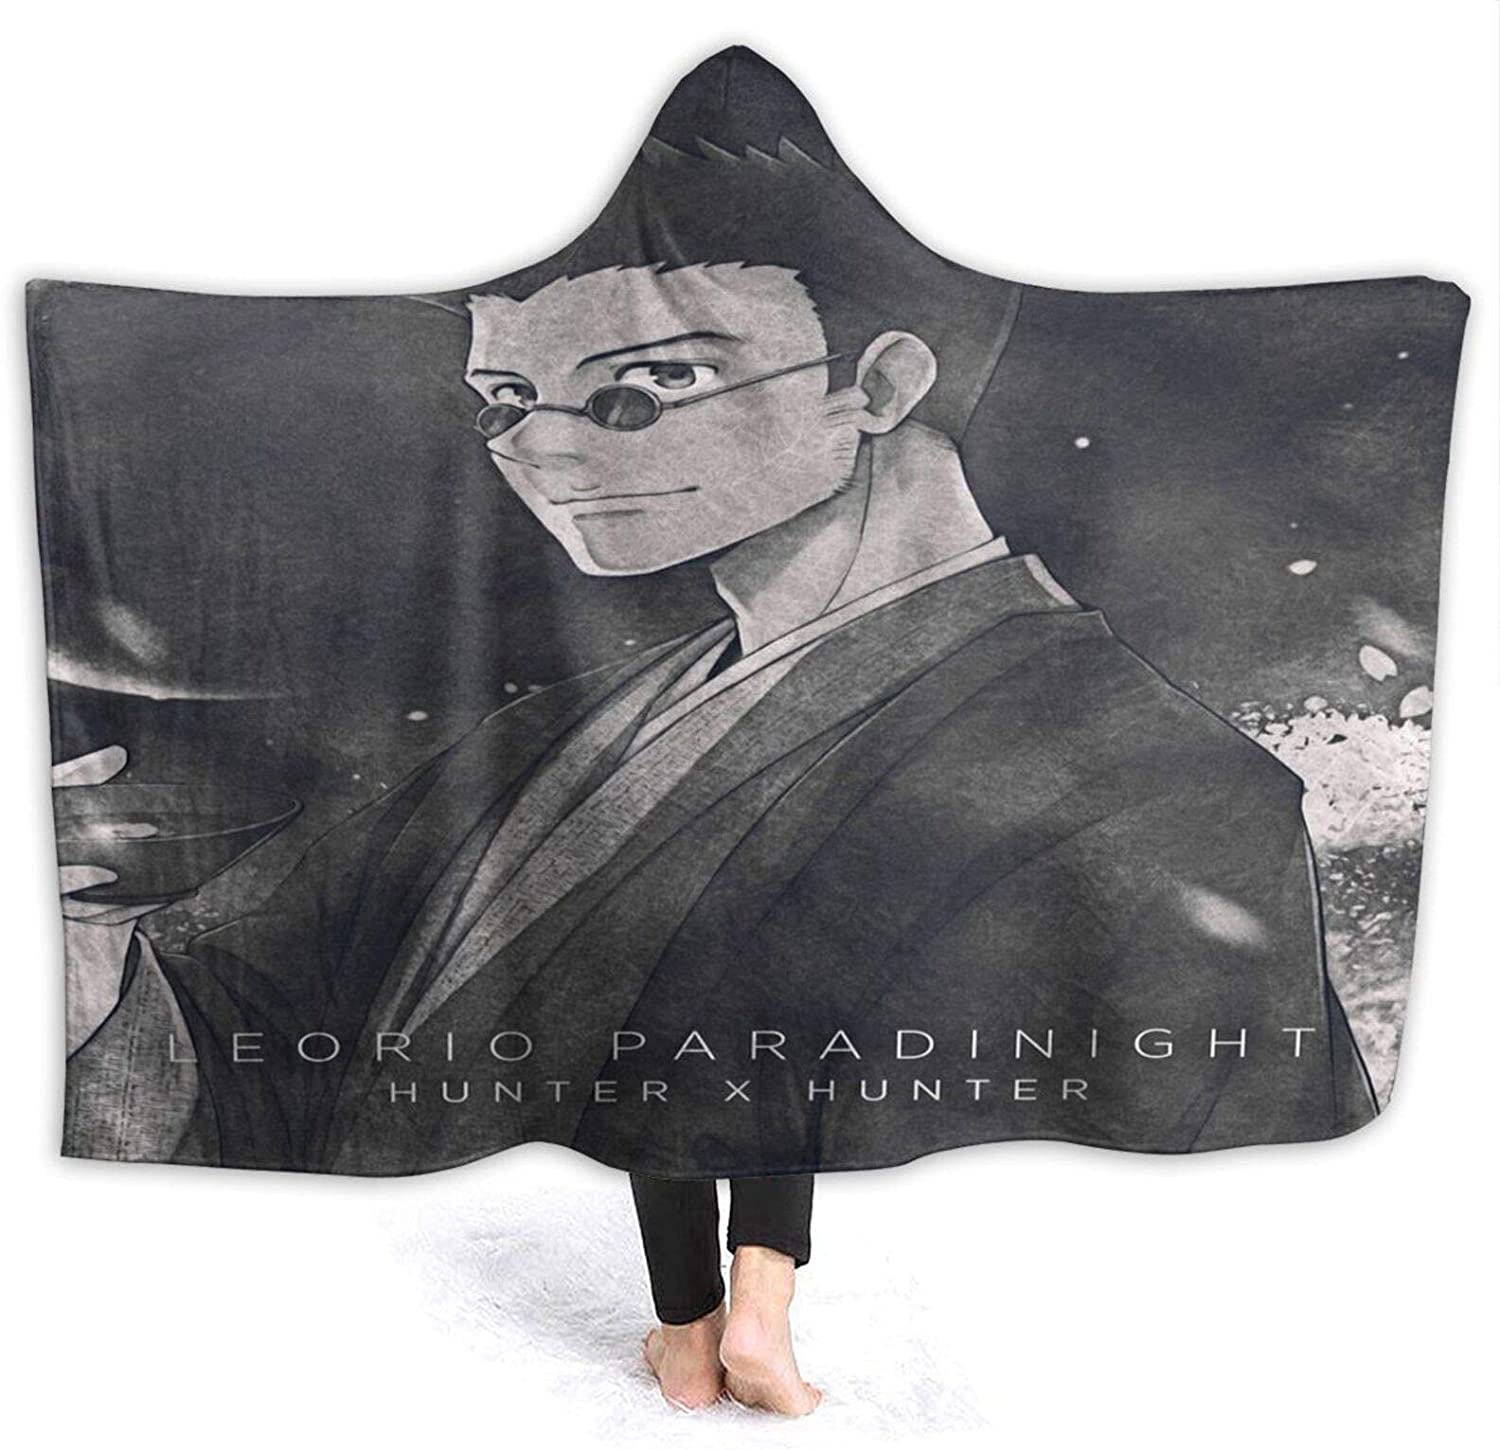 H-unter X H-unter Leorio Paradinight 3D Printed Hooded Blanket